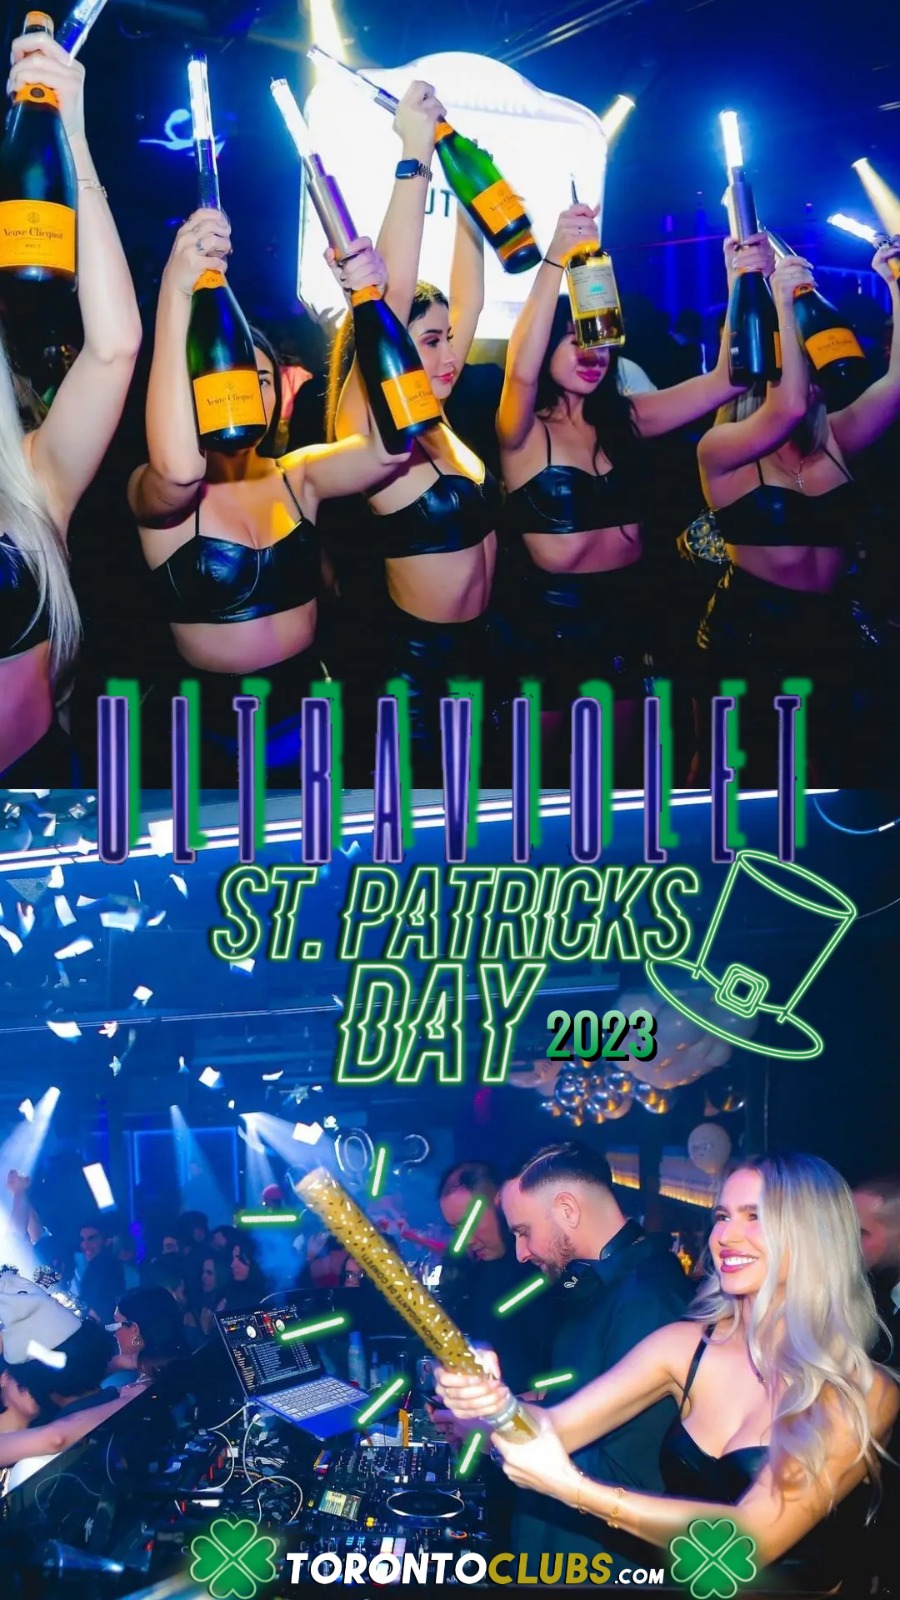 ST. PATRICK'S DAY 2023 EVENT & PARTY AT ULTRAVIOLET TORONTO